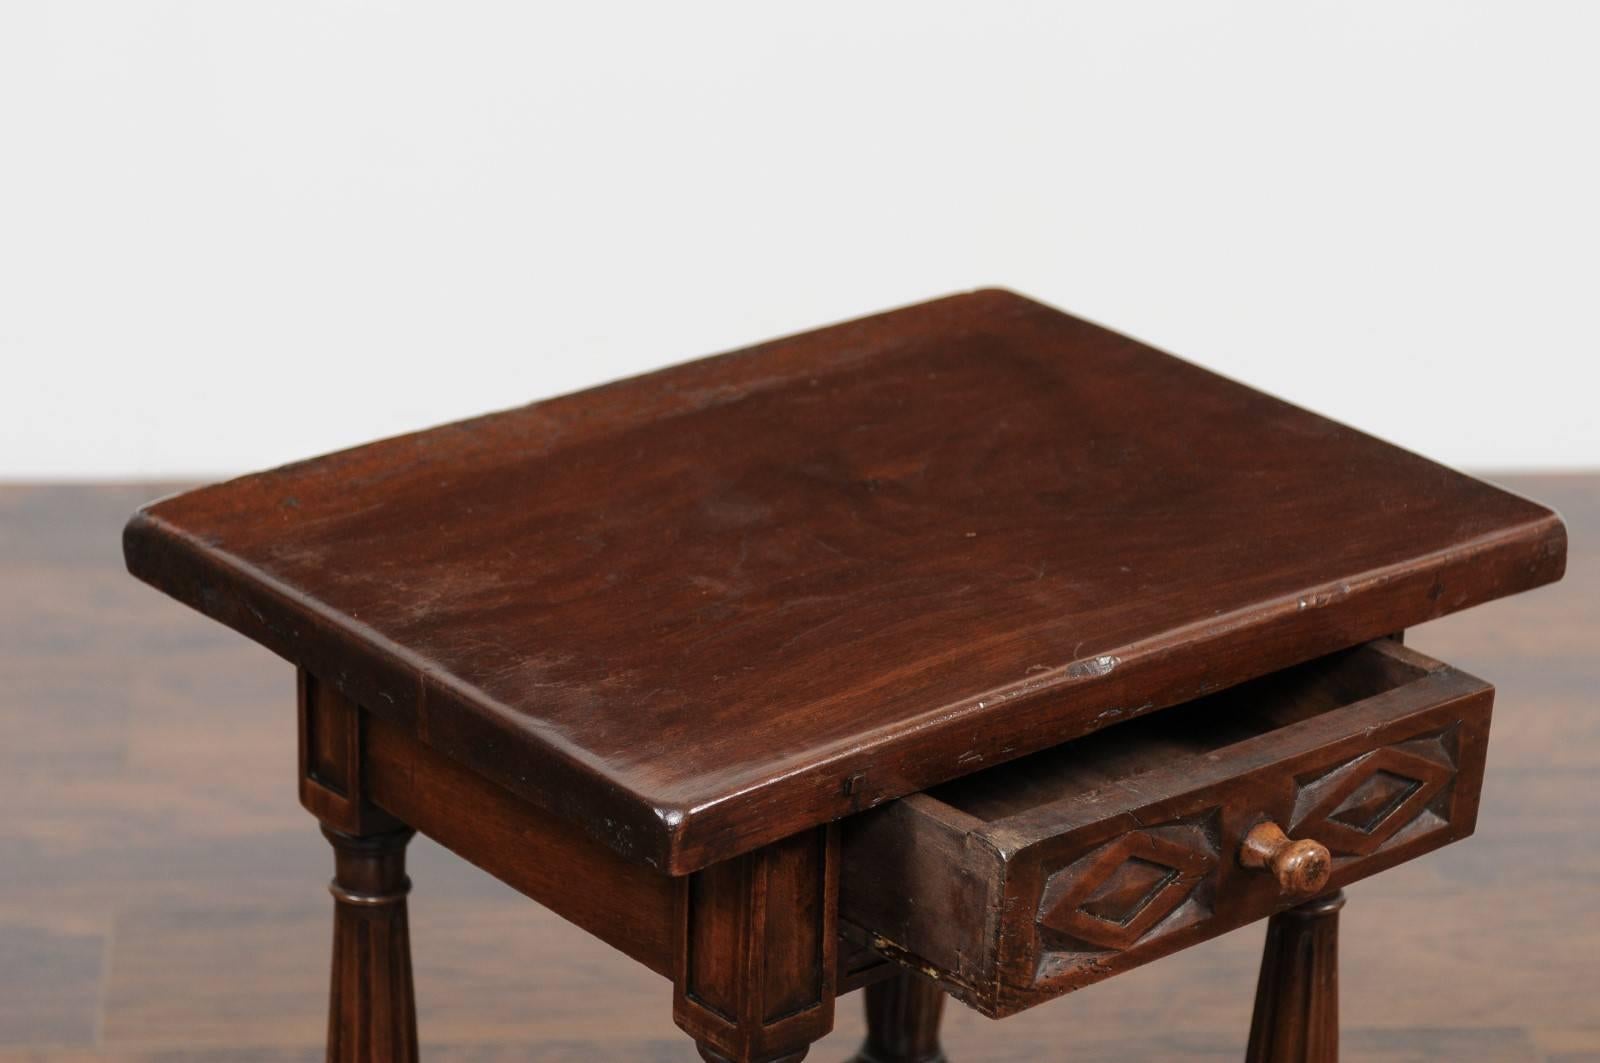 19th Century Petite Italian Walnut Side Table with Single Drawer and Fluted Legs, circa 1870 For Sale